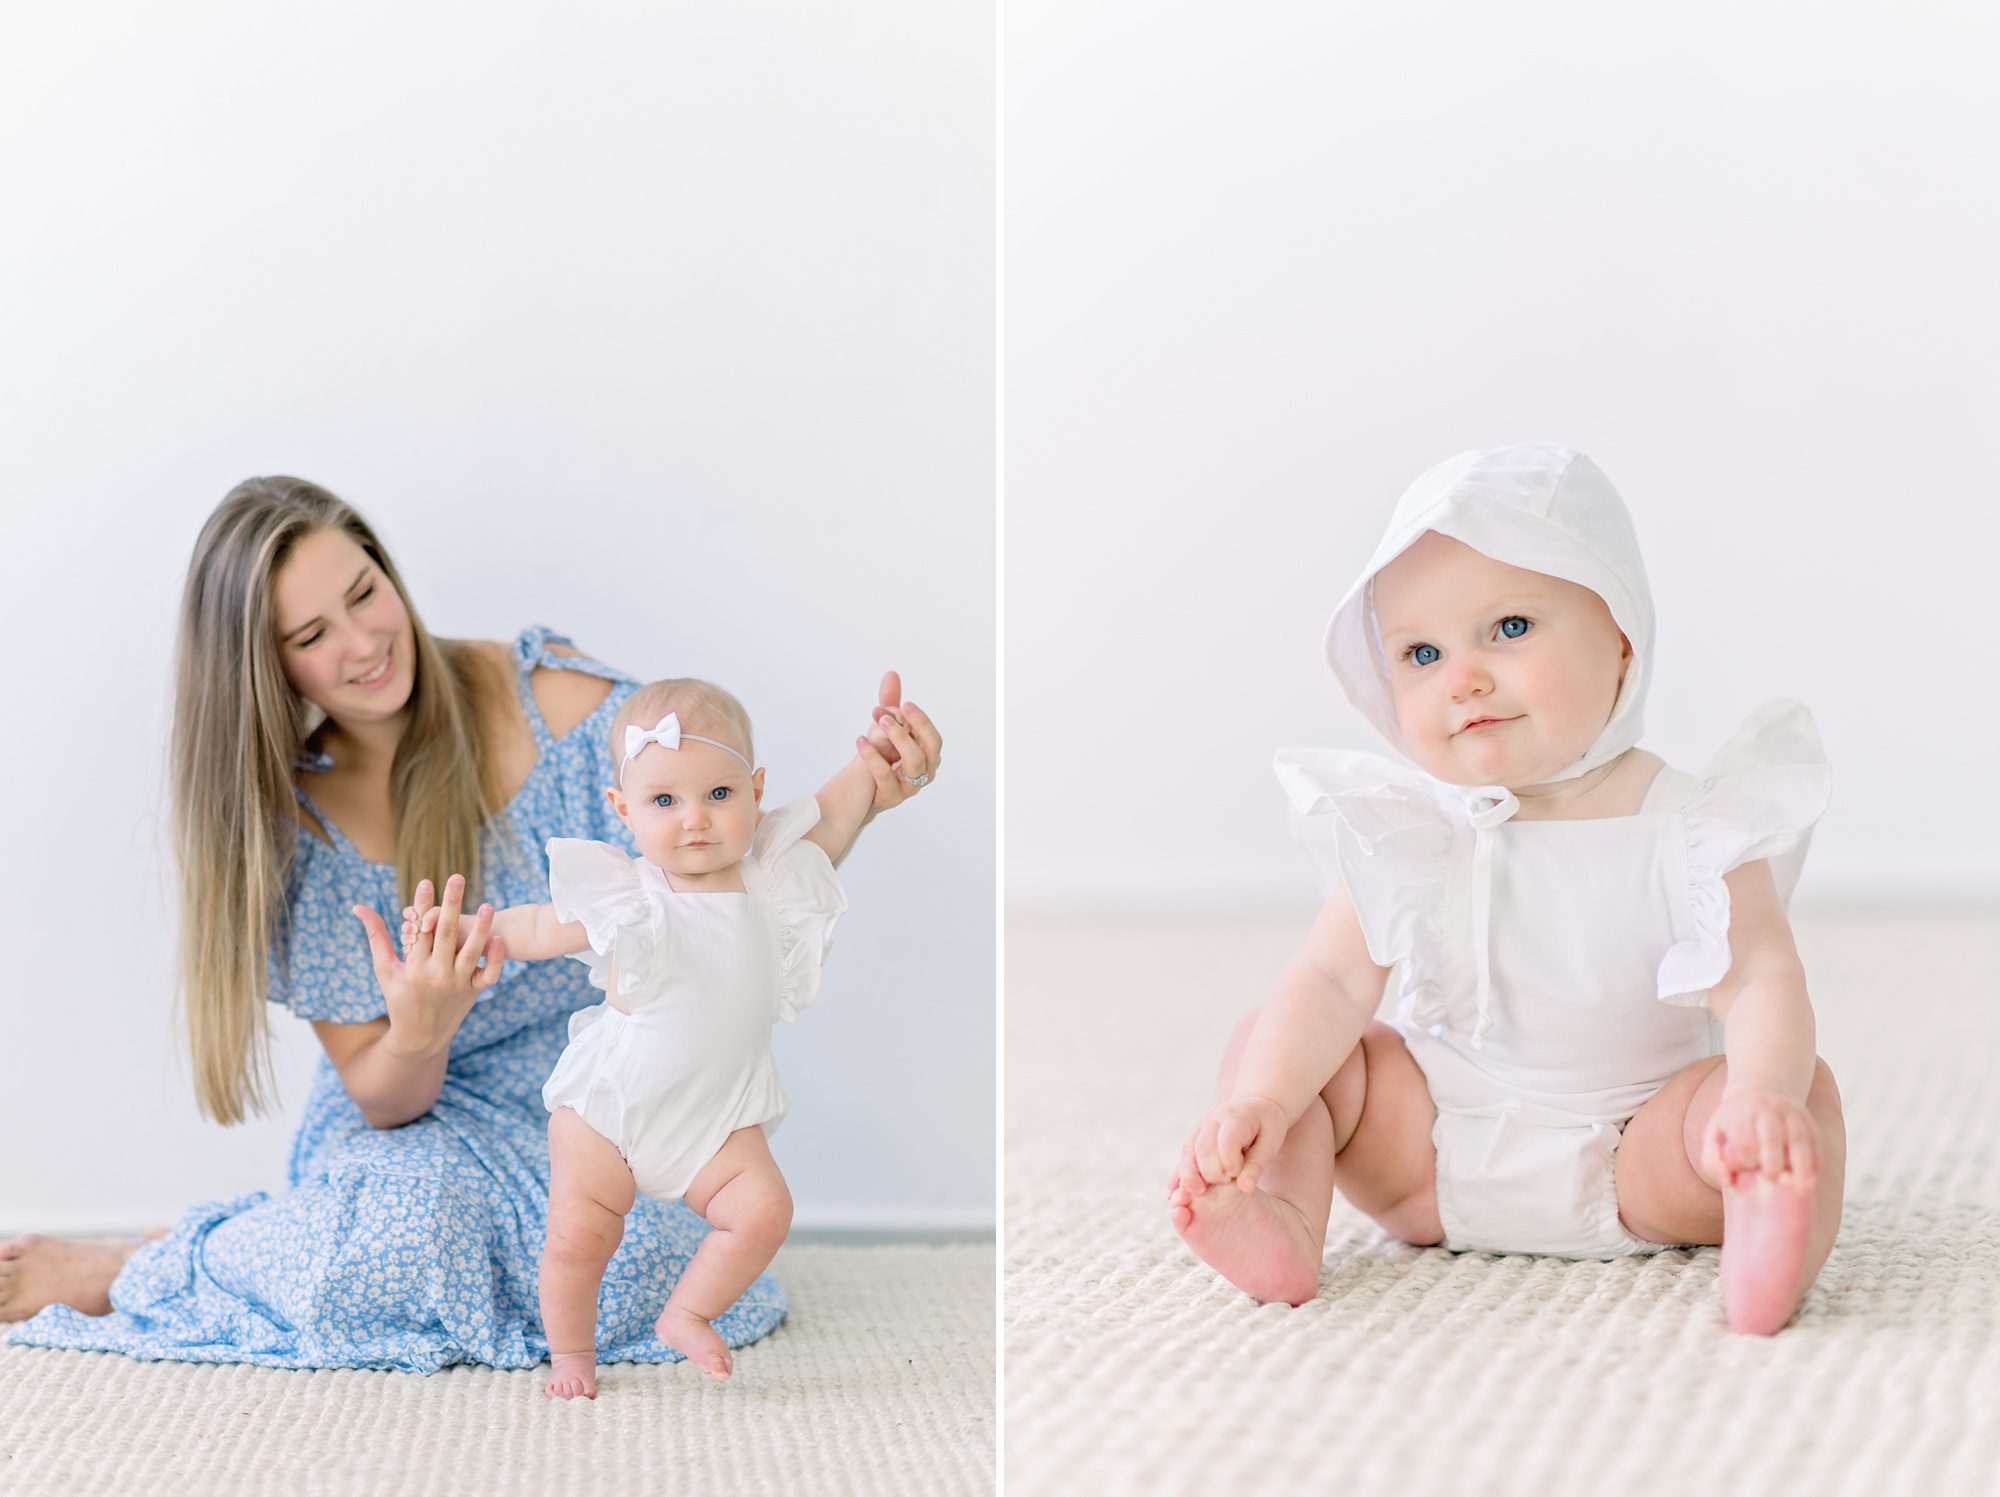 A stunning young mom gets portraits done in a photography studio in Denver with her adorable 7 month old daughter.